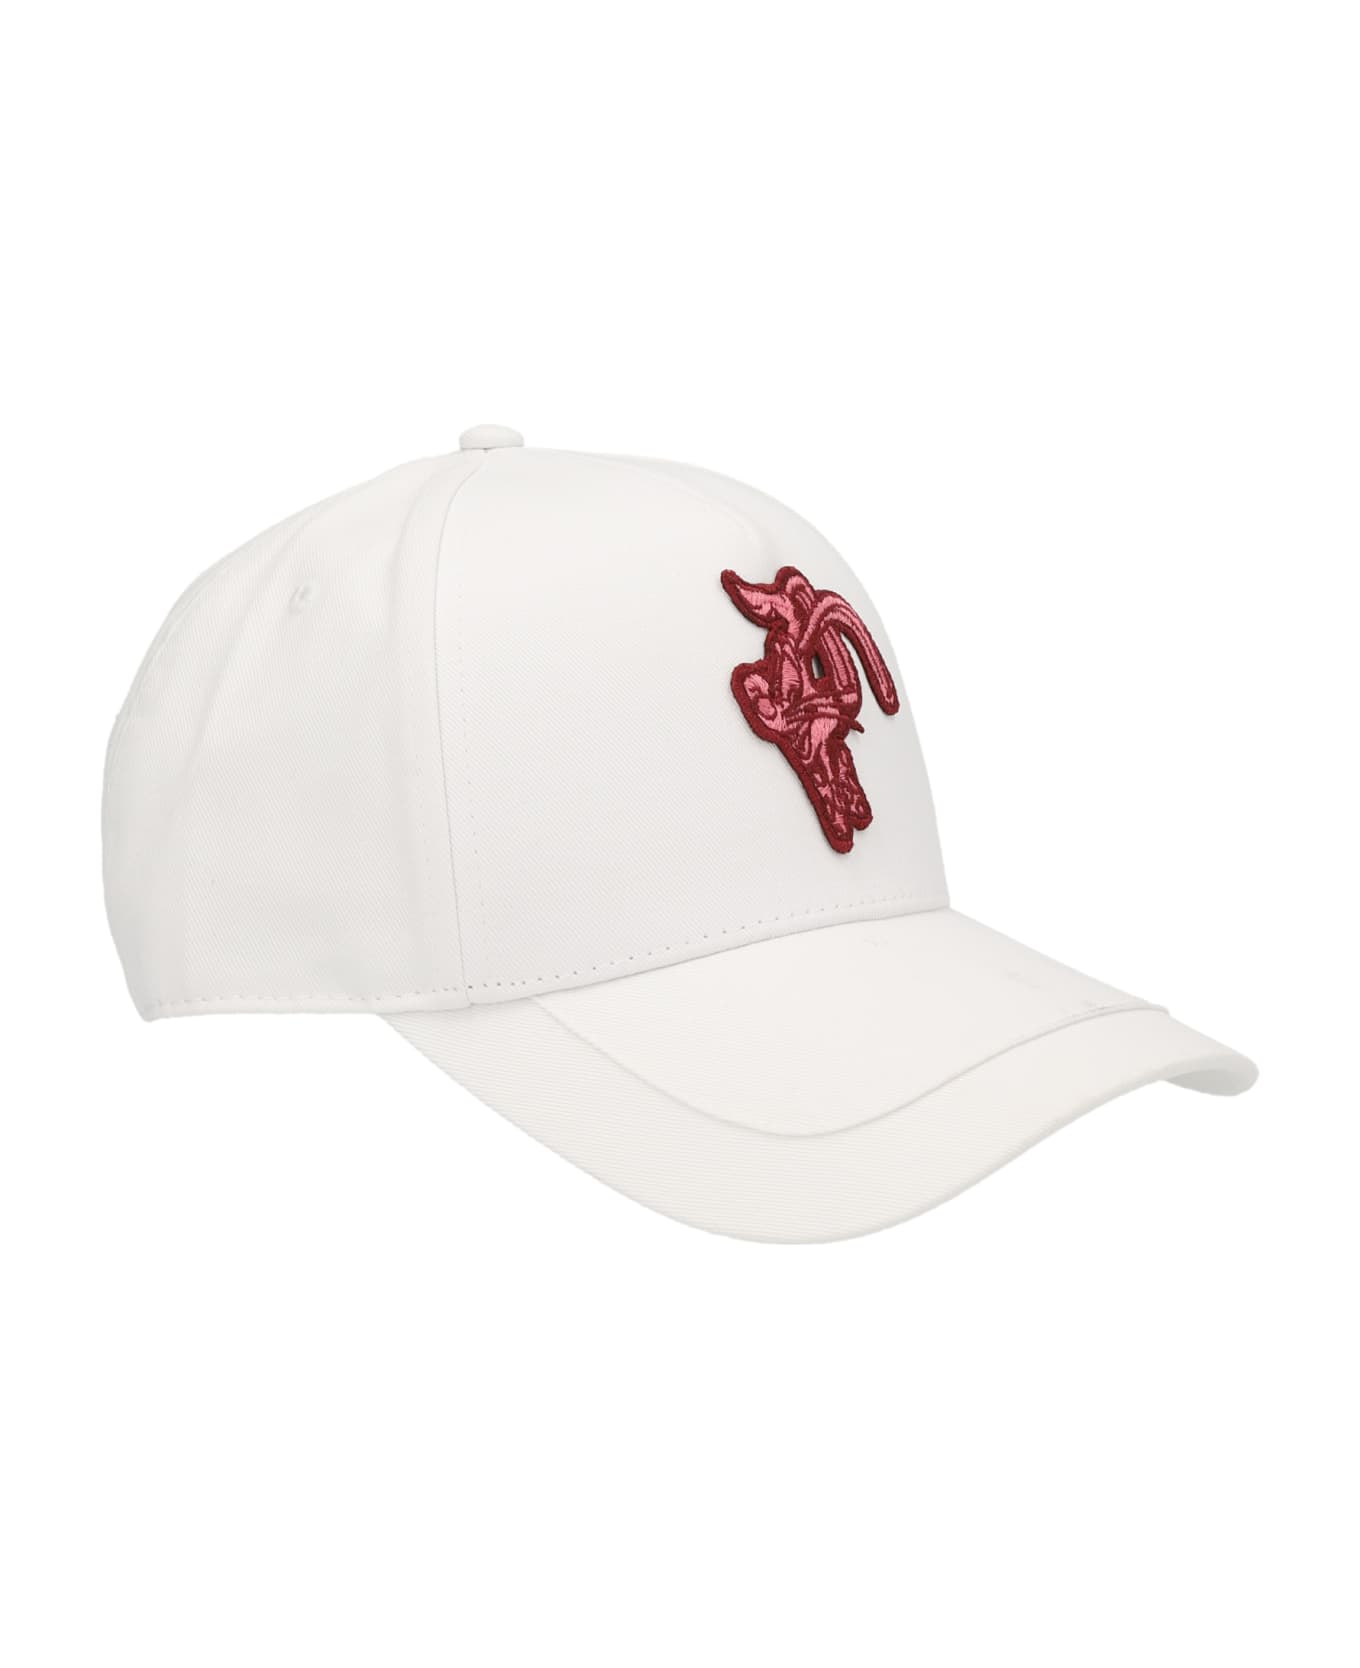 Moncler Chinese New Year Capsule Cap - White